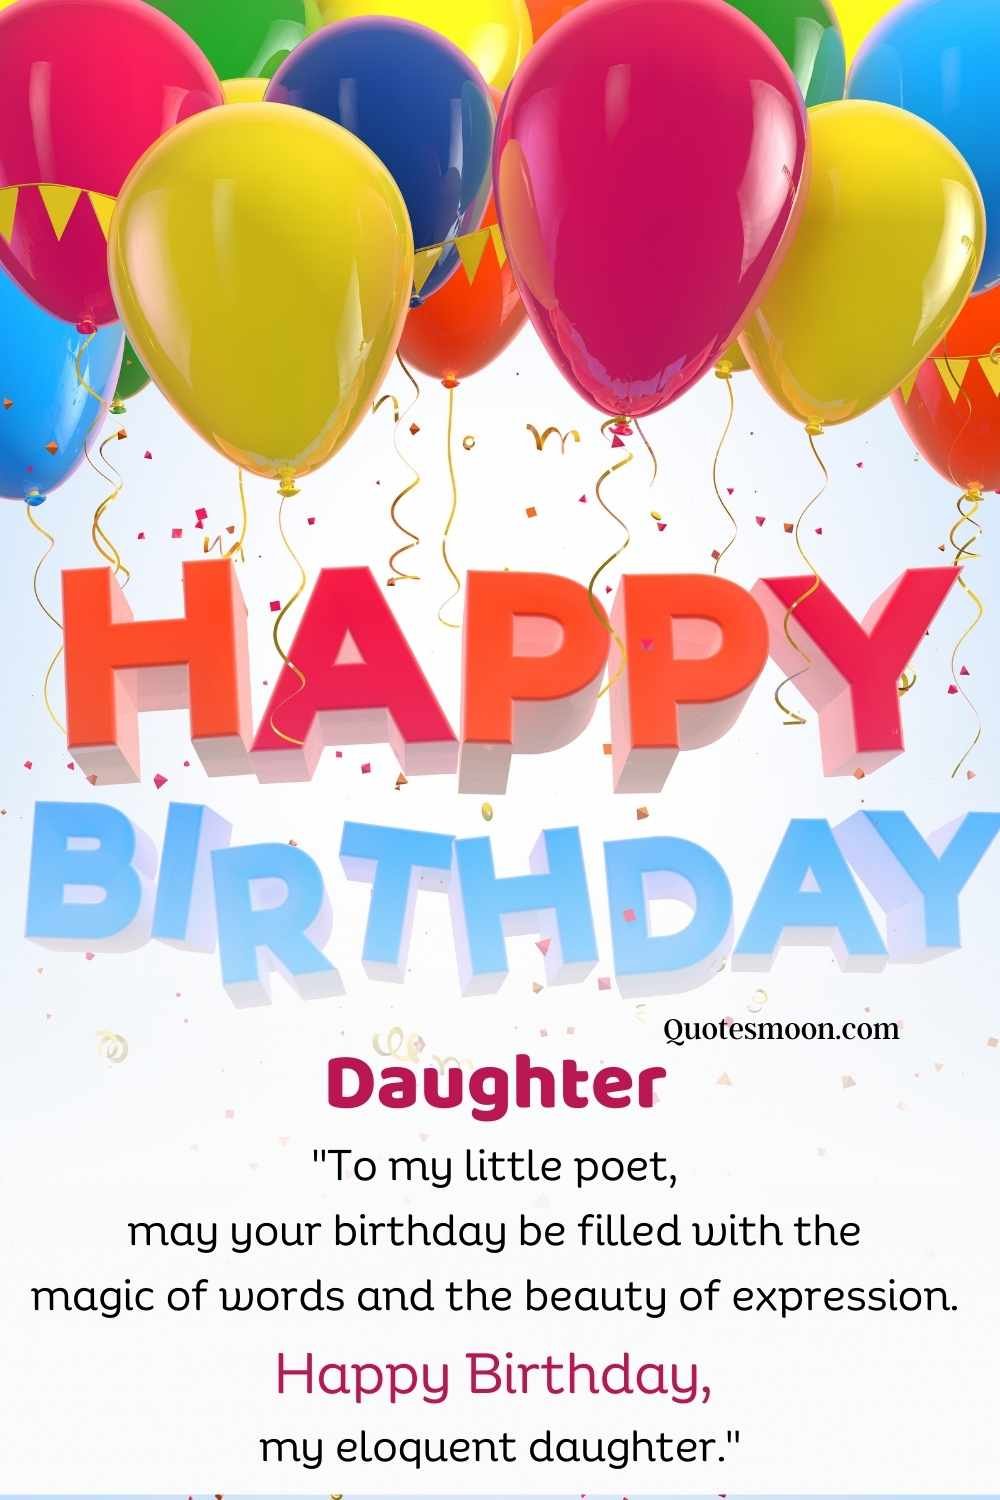 happy birthday dear daughter images new